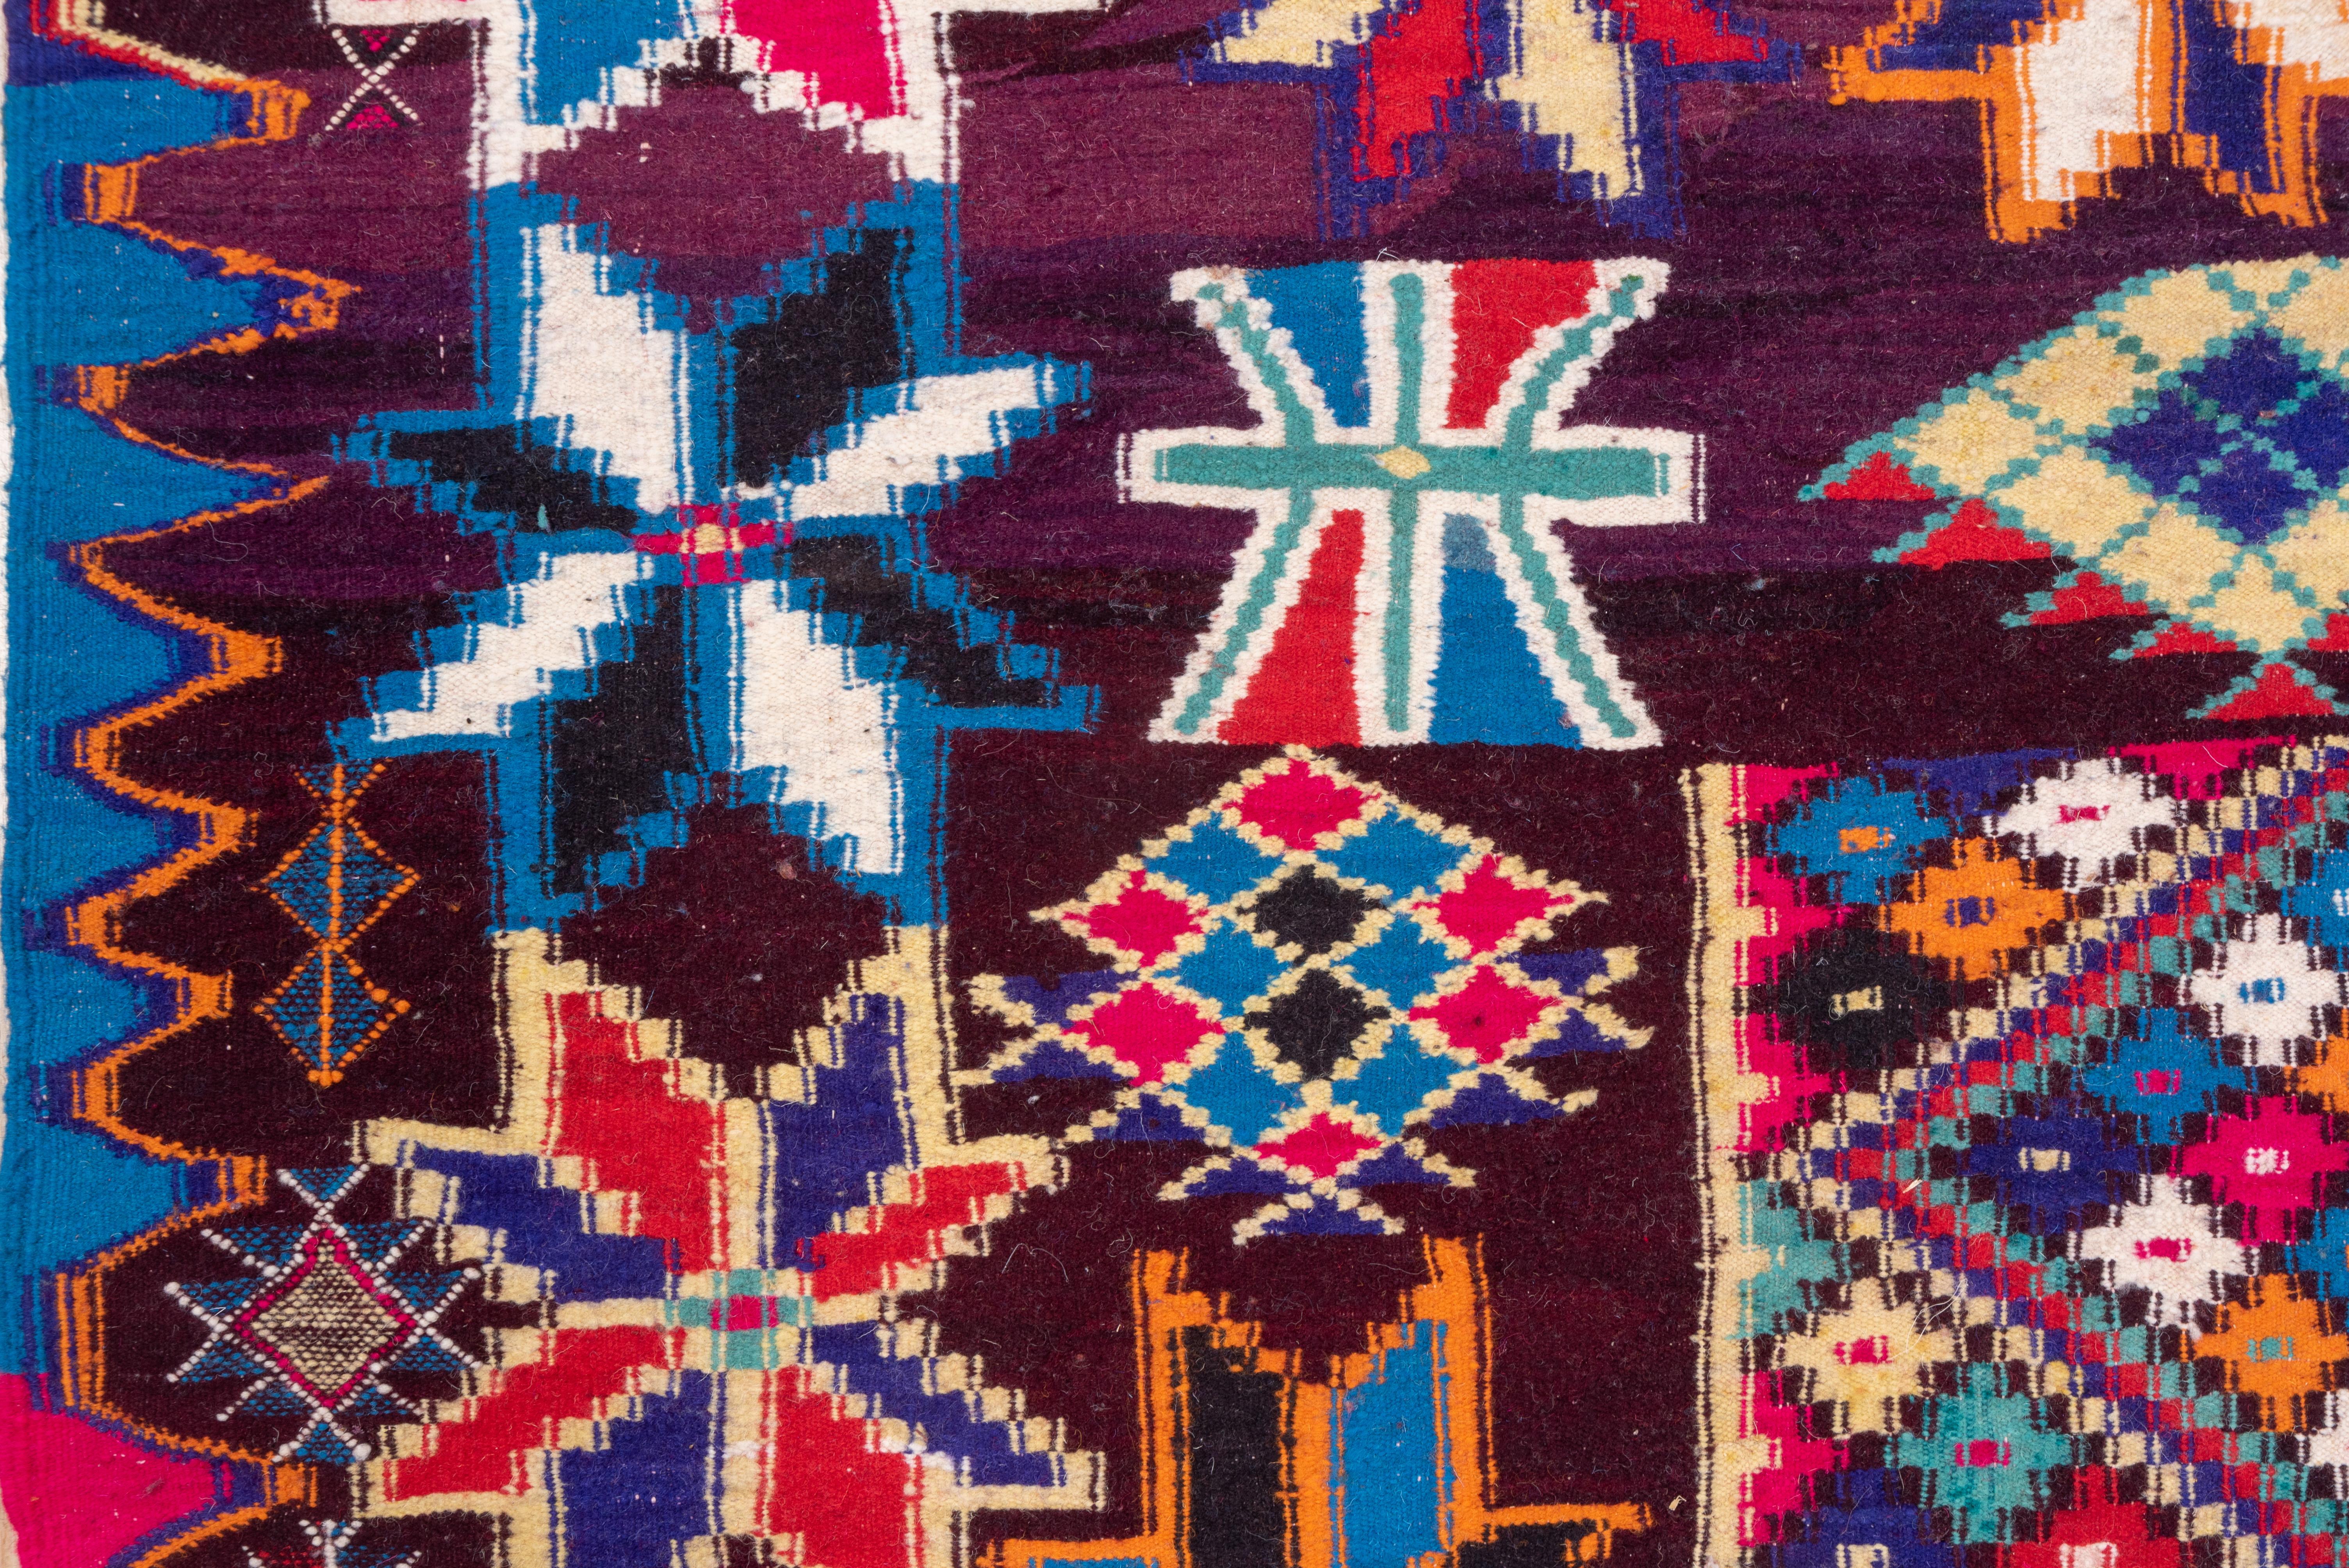 The eggplant ground of this tribal flat-weave carpet displays eleven rows of colorful stars set closely around a small central rectangle with a polychrome lozenge mosaic. At one end is a border of double triangles while at the other is a partial